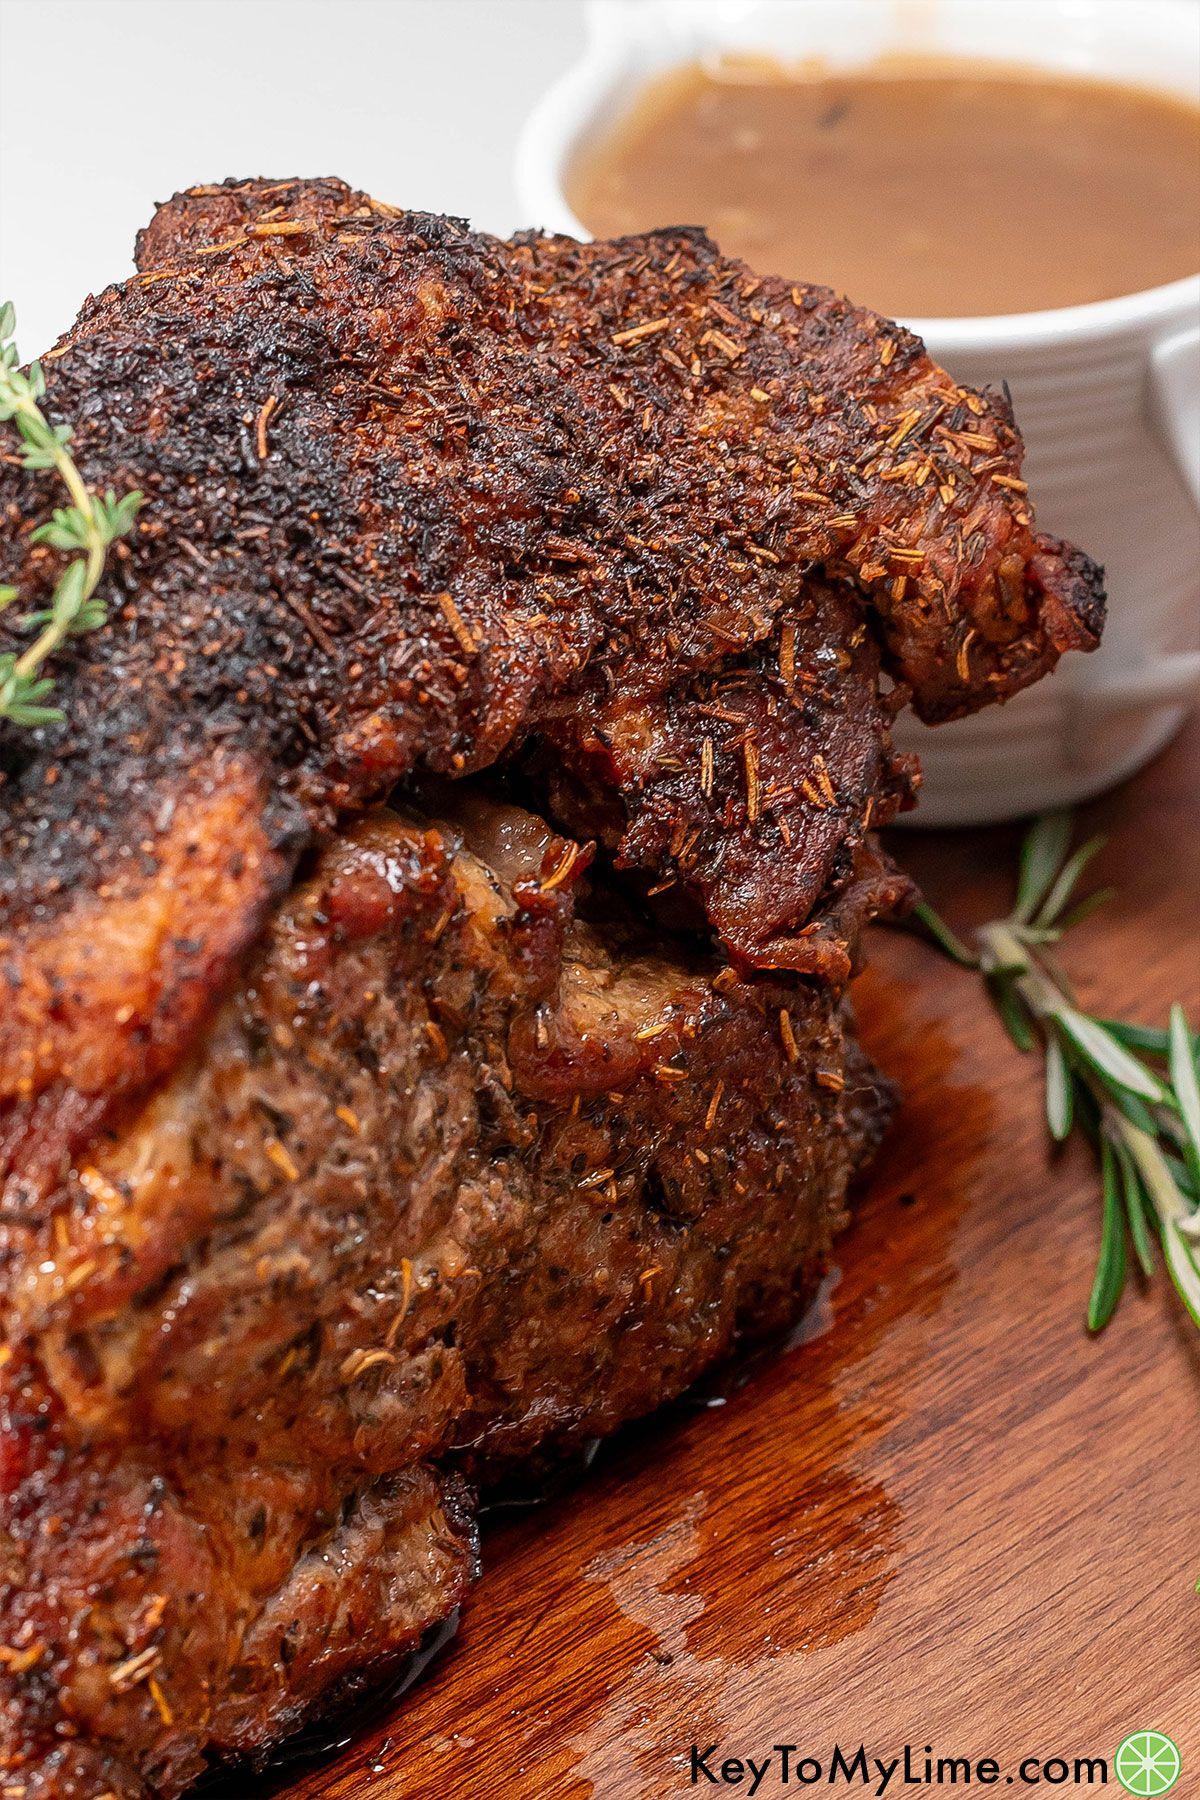 A fully cooked pork roast on a cutting board garnished with thyme.